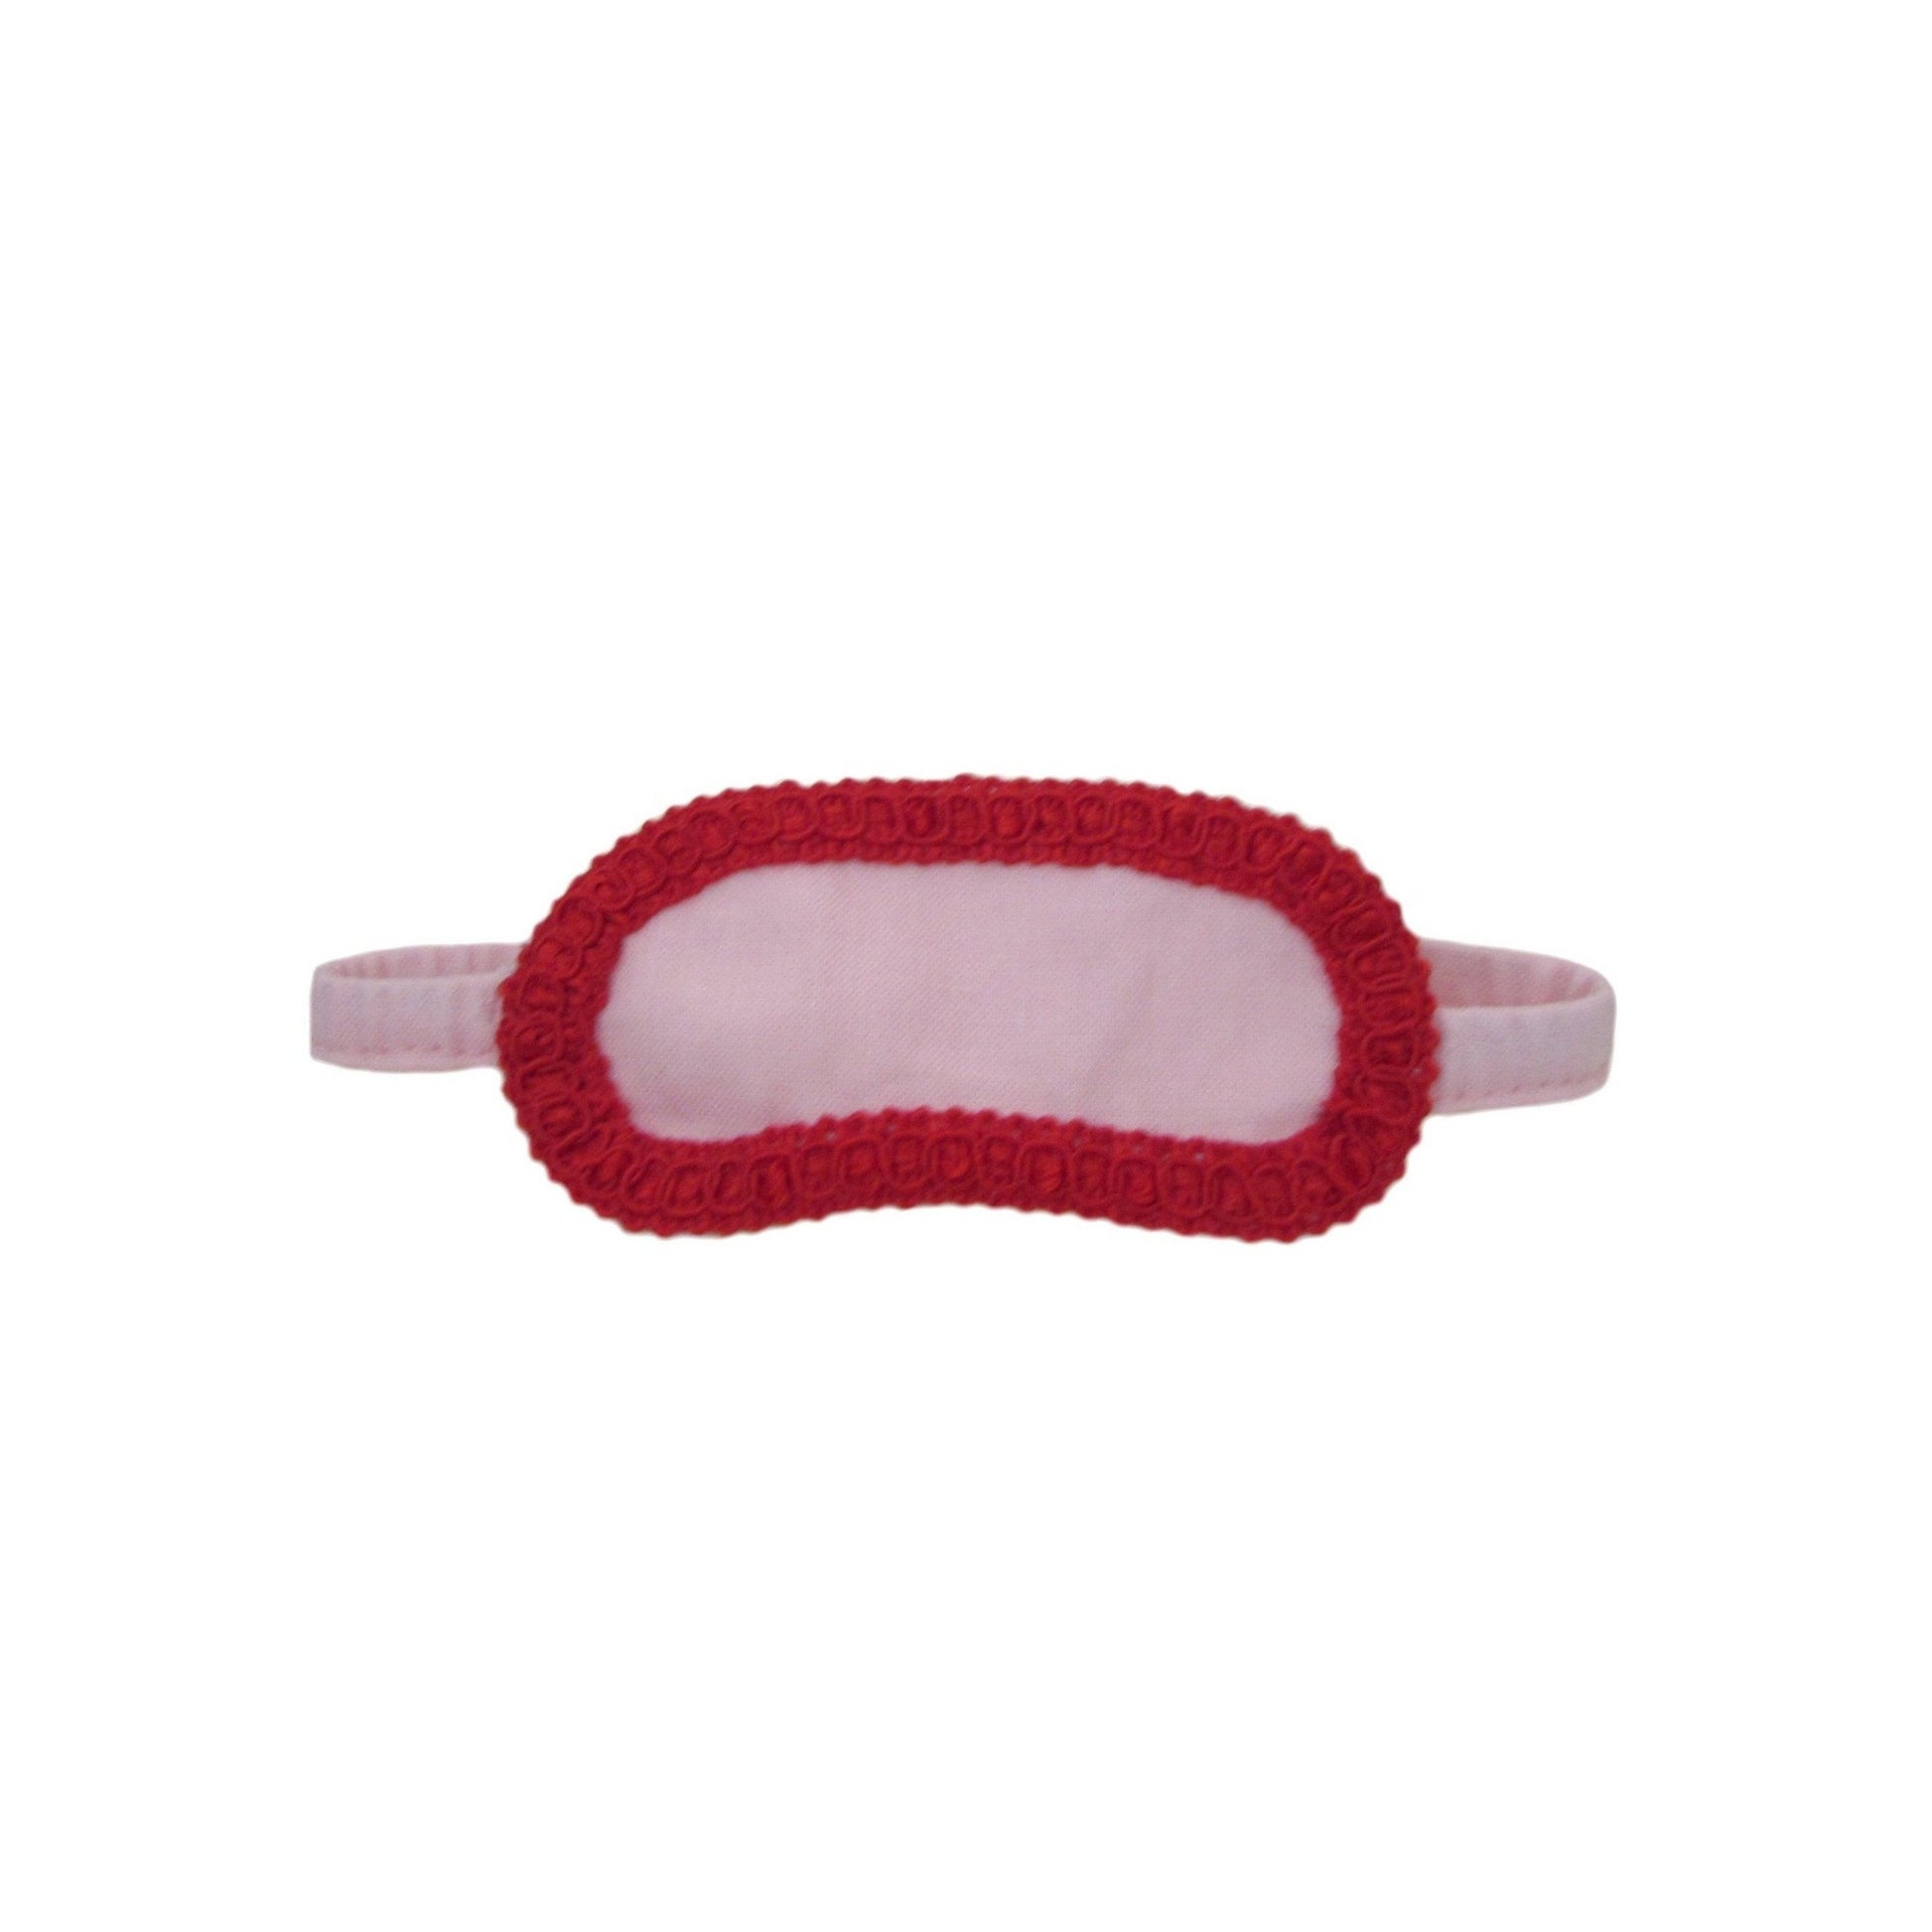 Light Pink with Red Trim Doll Sleep Mask for 18-inch dolls